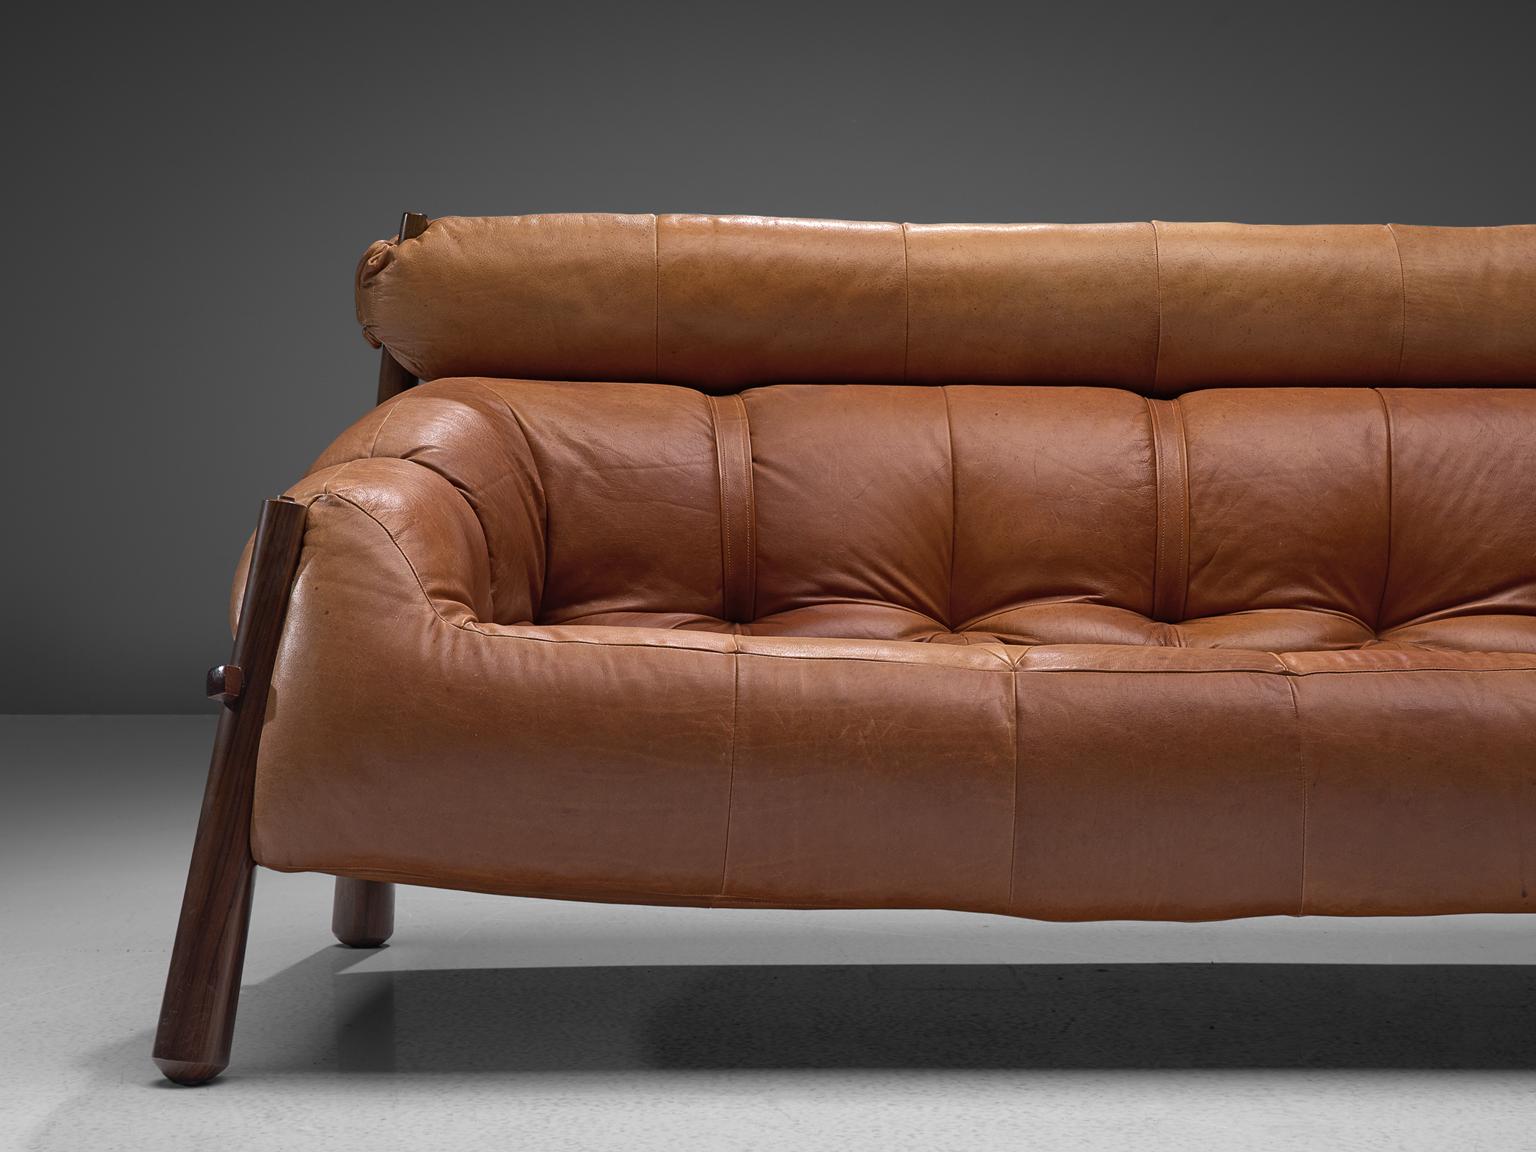 Percival Lafer 'Mp-81' Lounge Set in Rosewood and Cognac 2